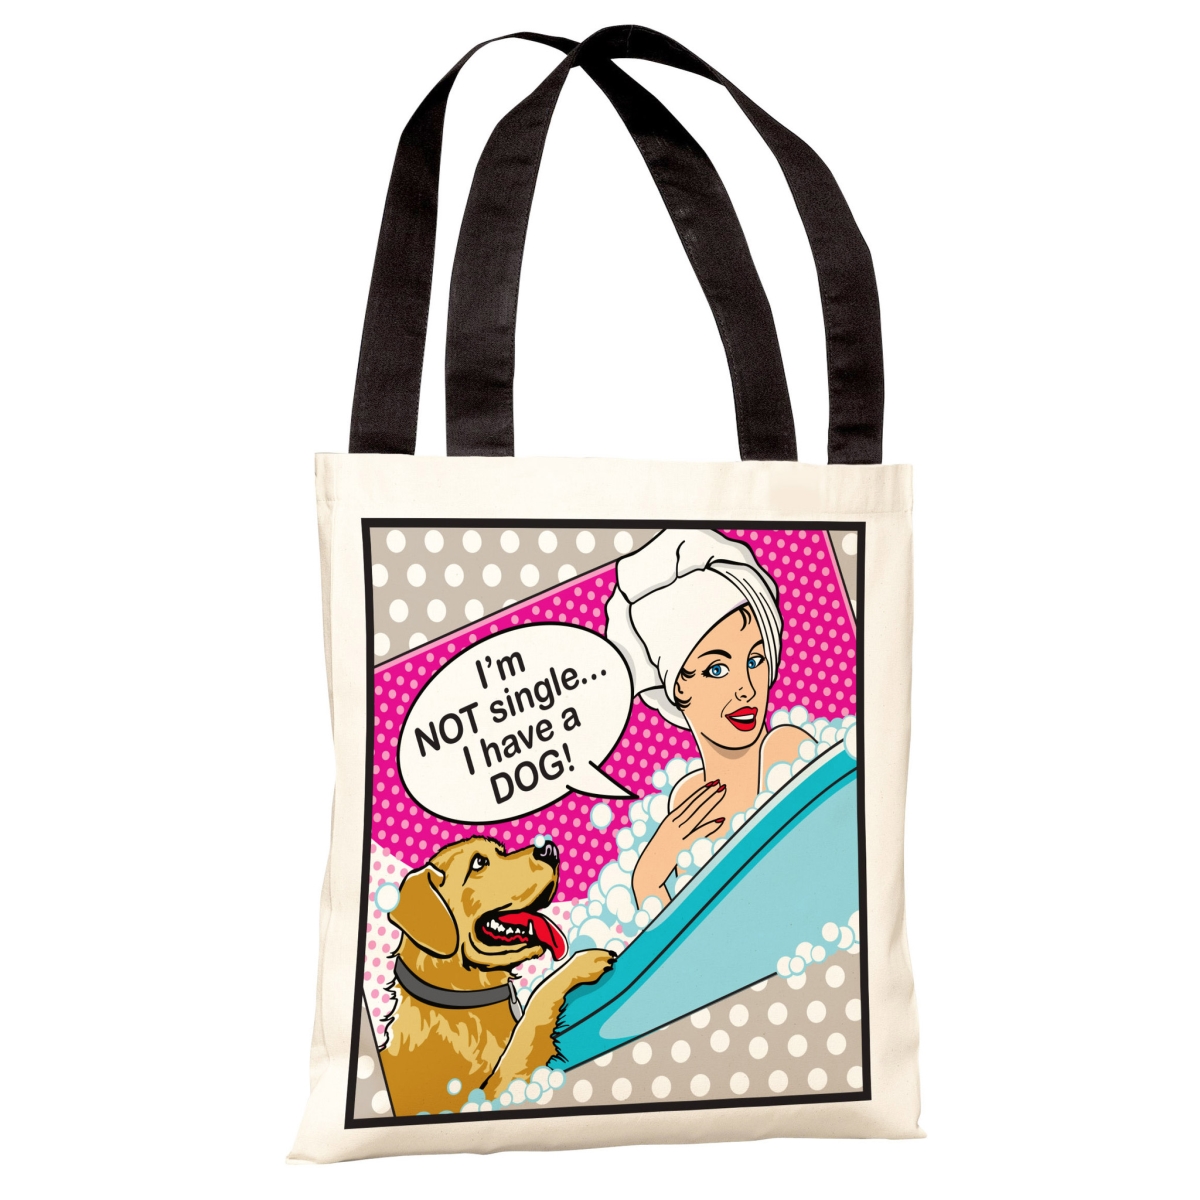 70094tt18p 18 In. Not Single Polyester Tote Bag By Dog Is Good